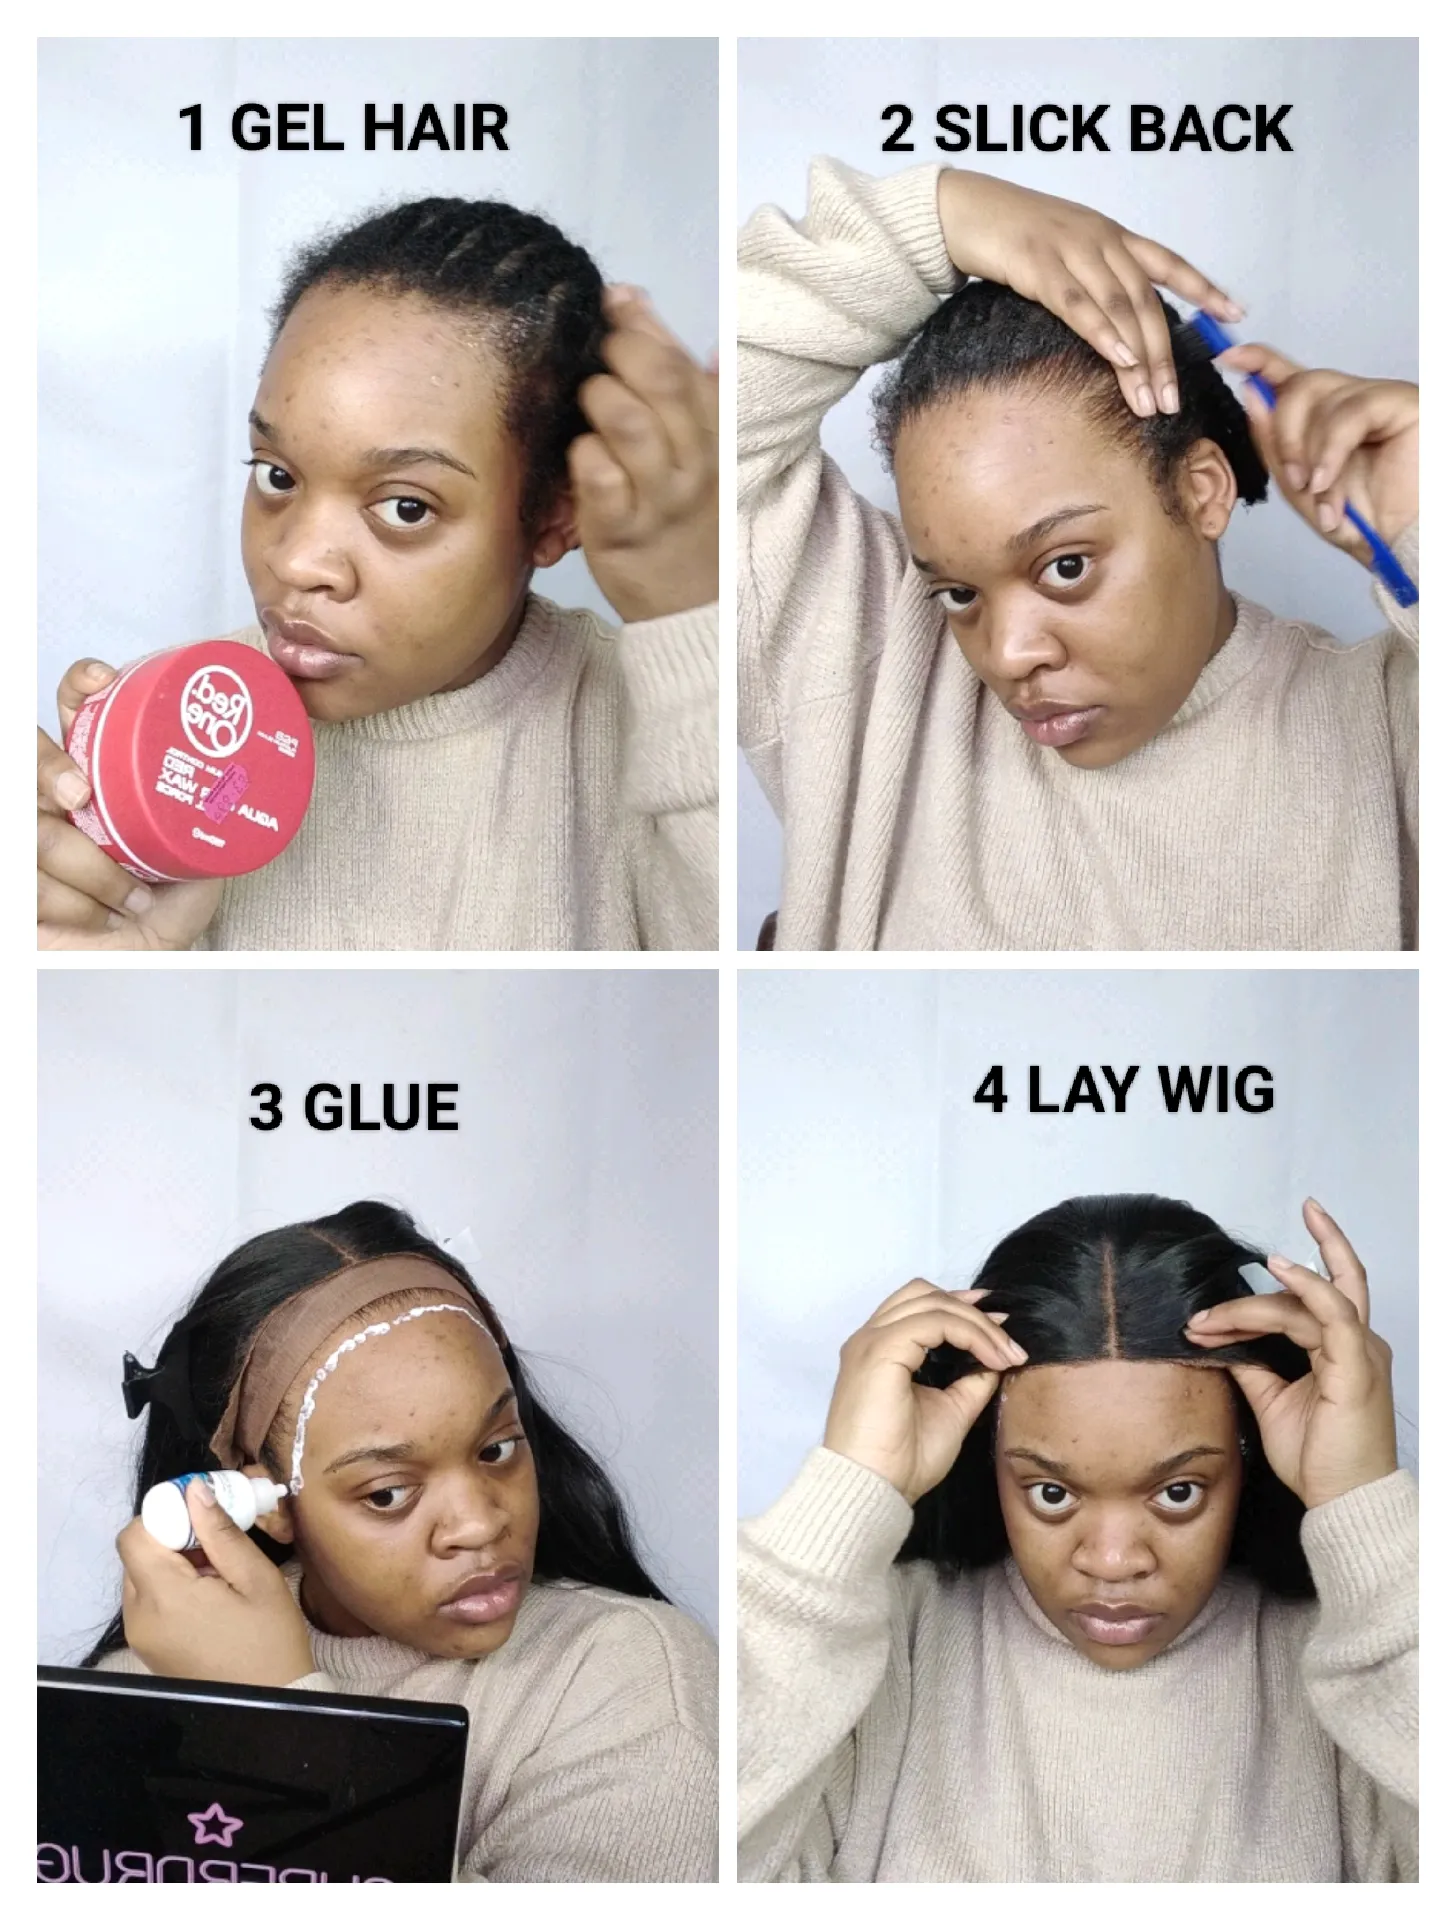 Wig Install products